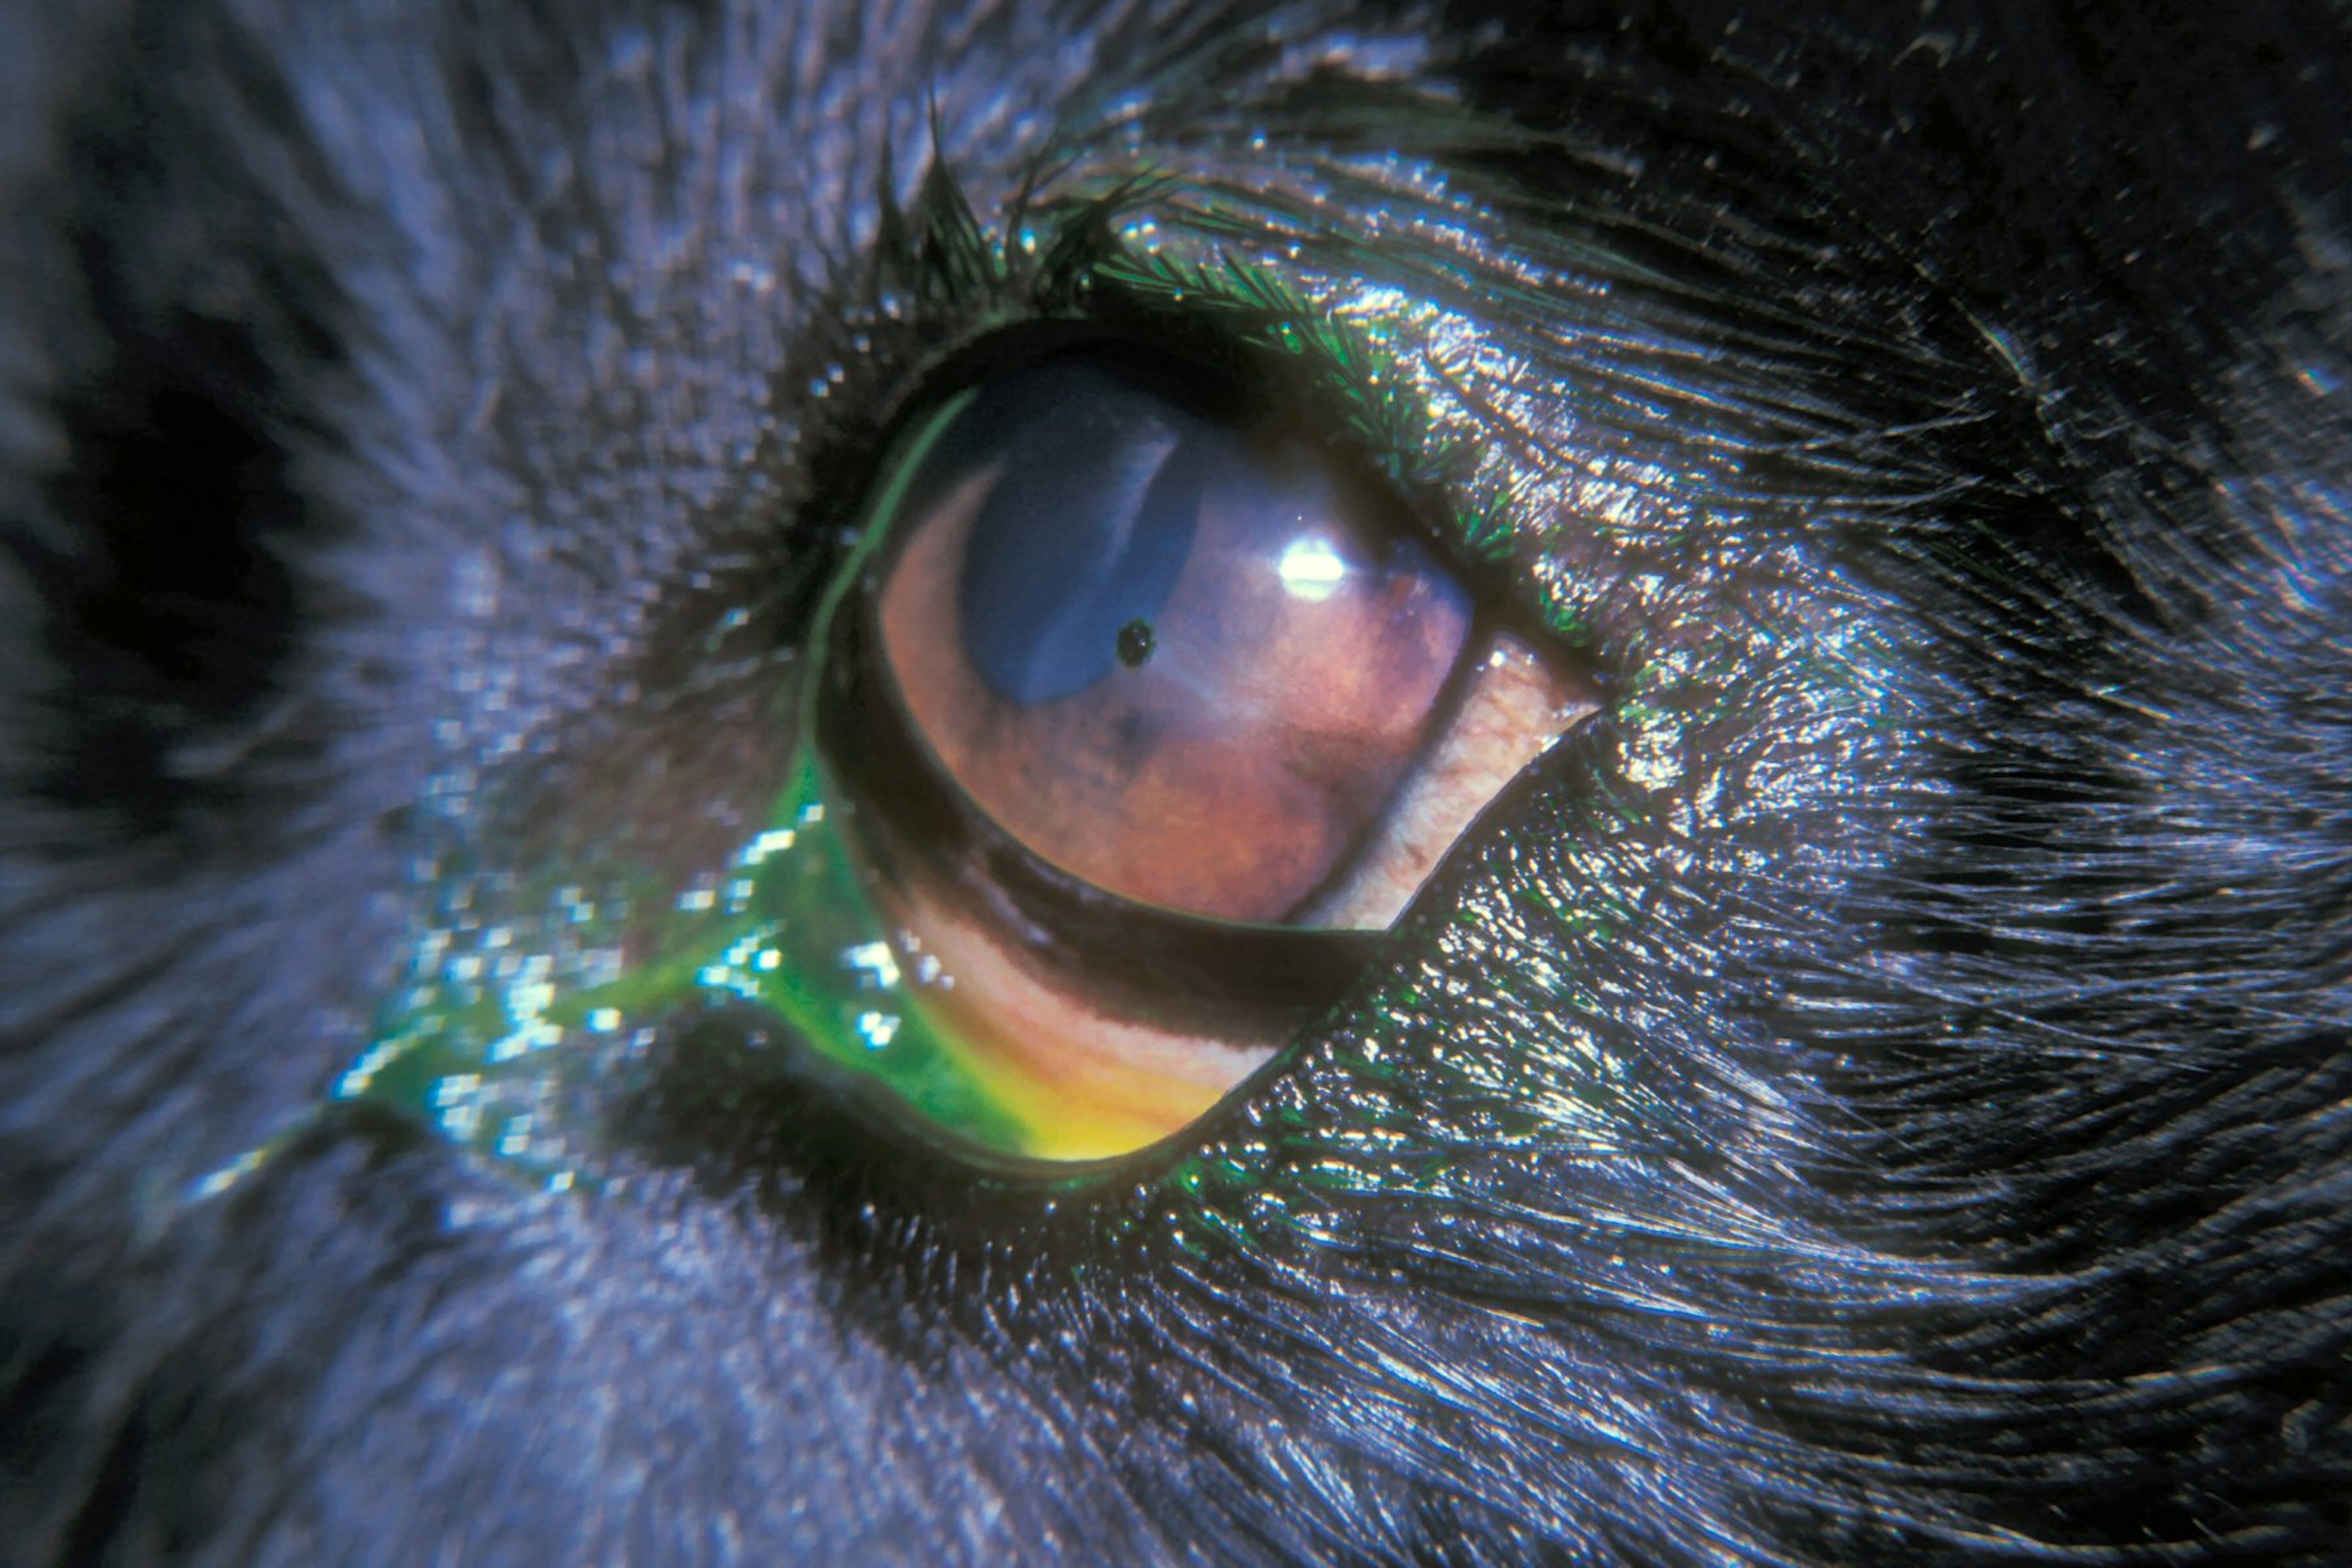 Superficial corneal foreign body, dog